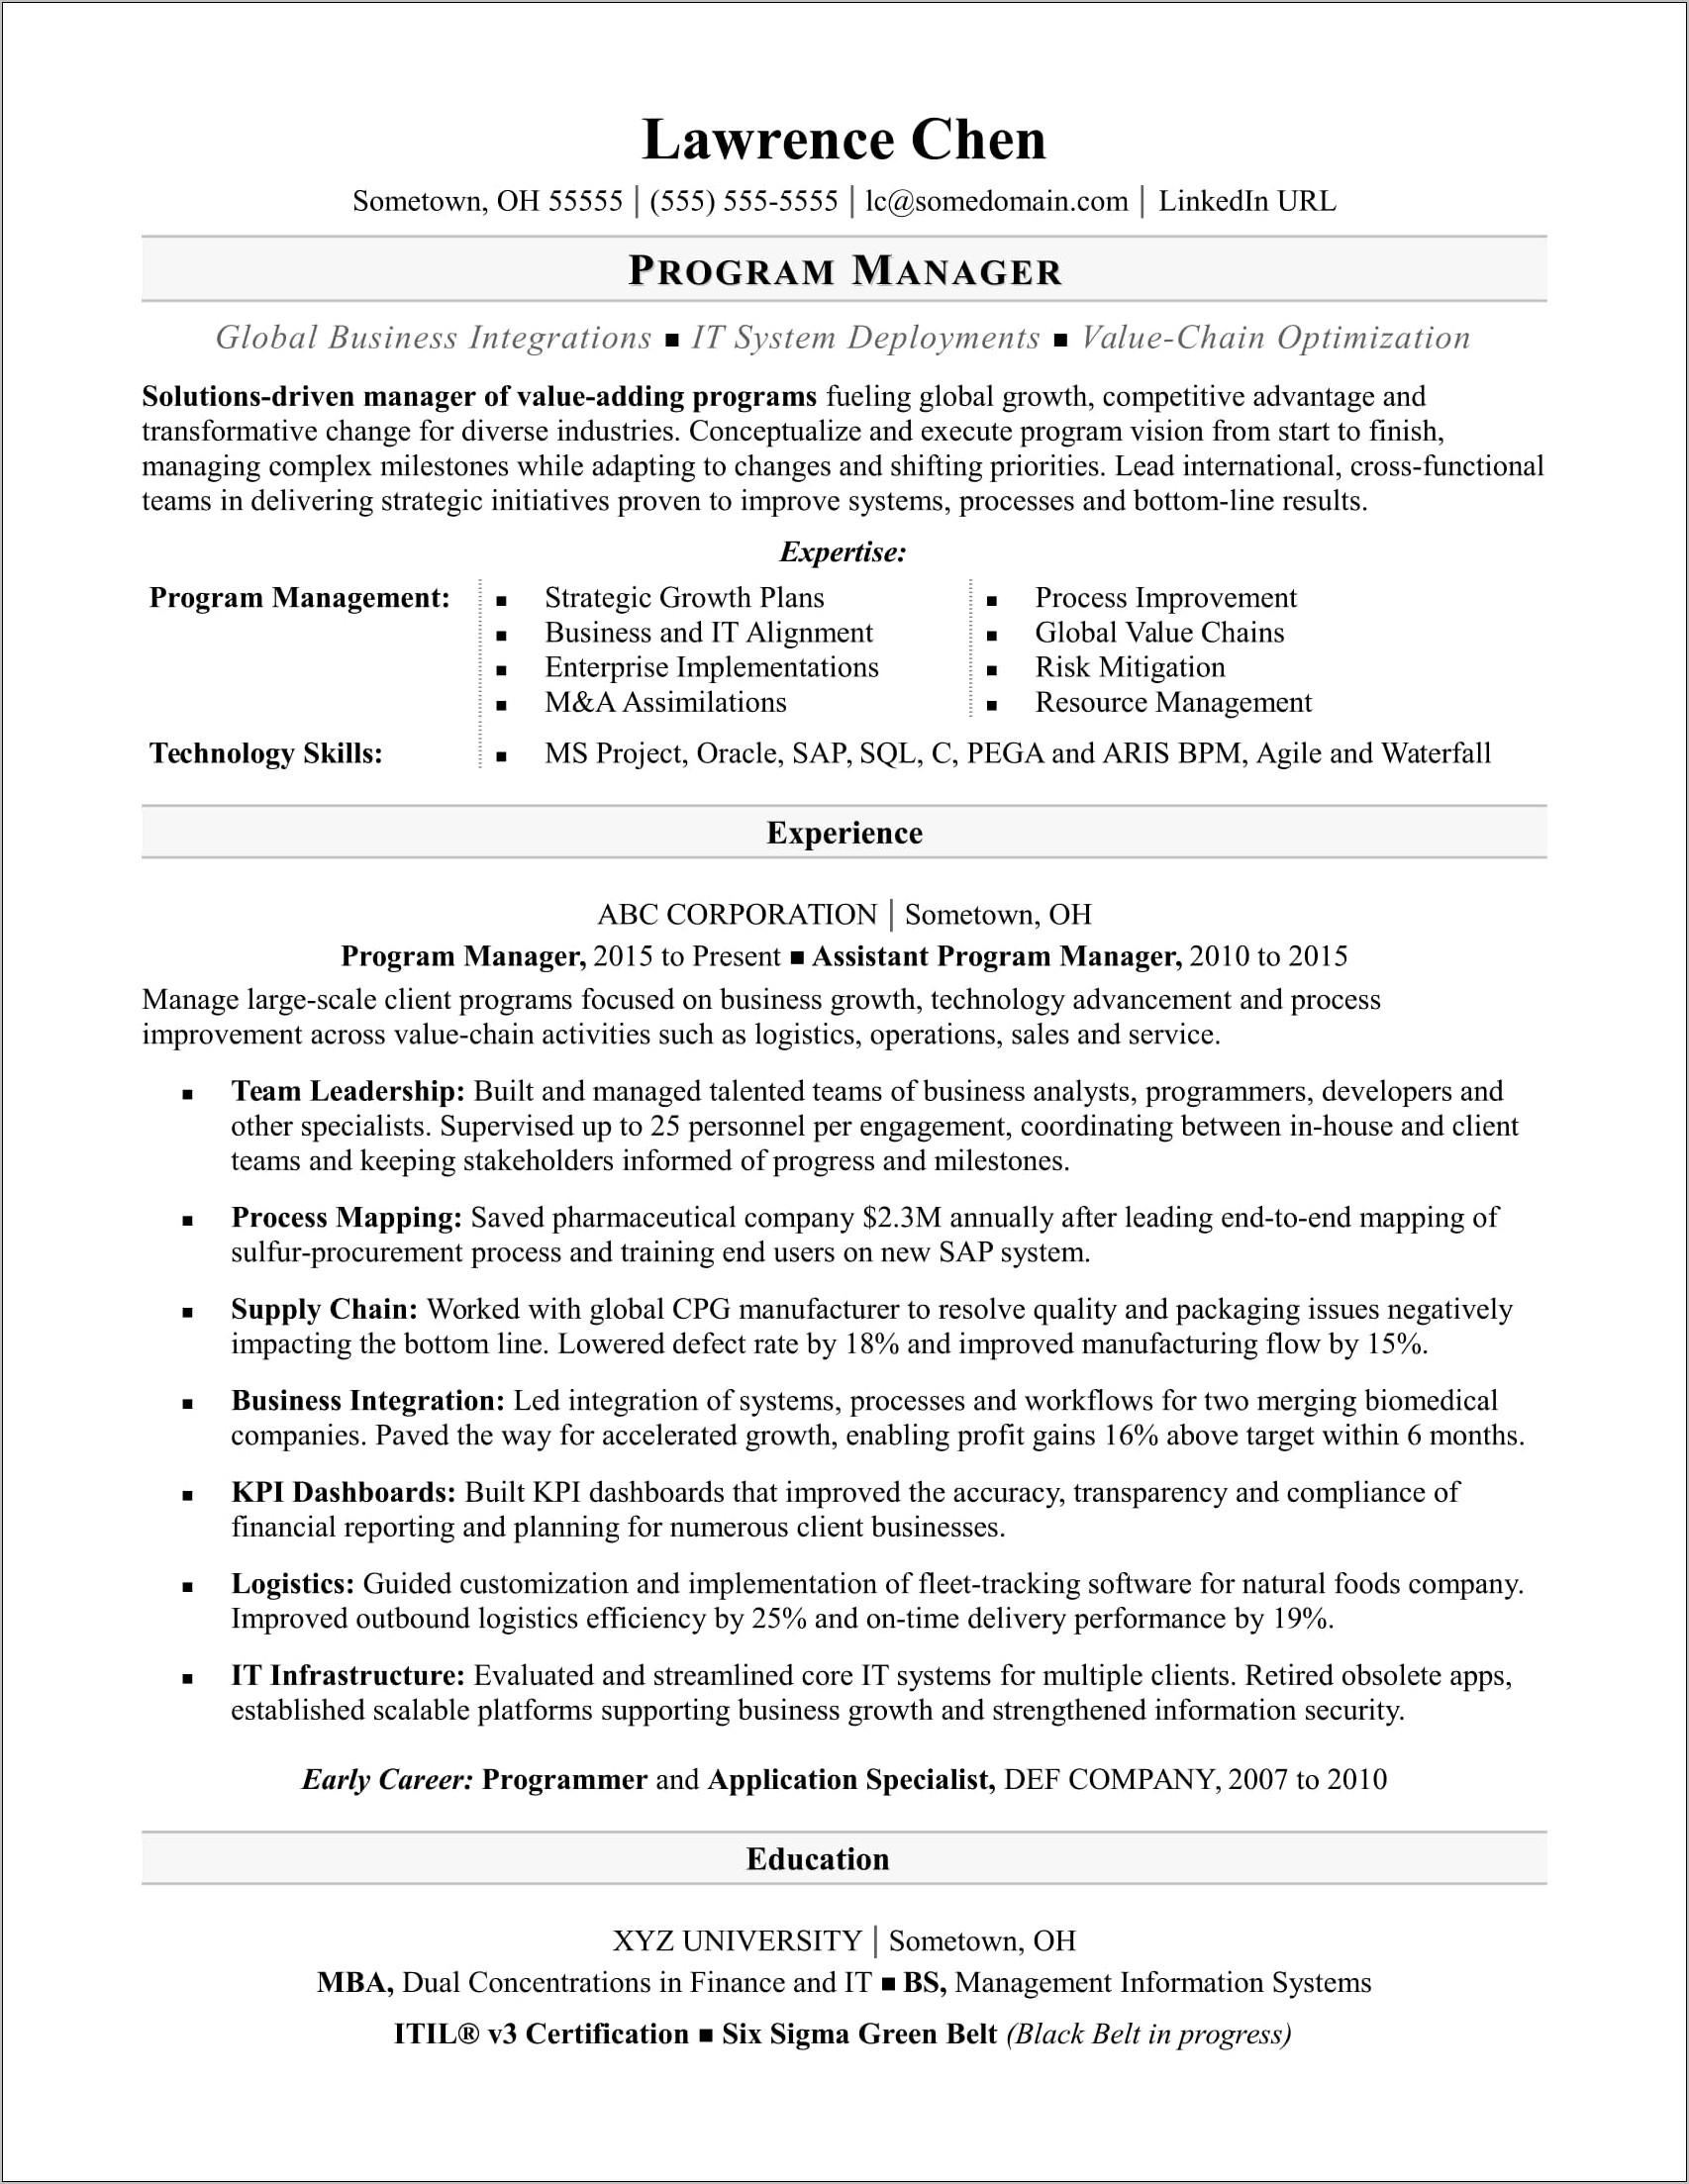 Central Supply Purchasing Manager Resume